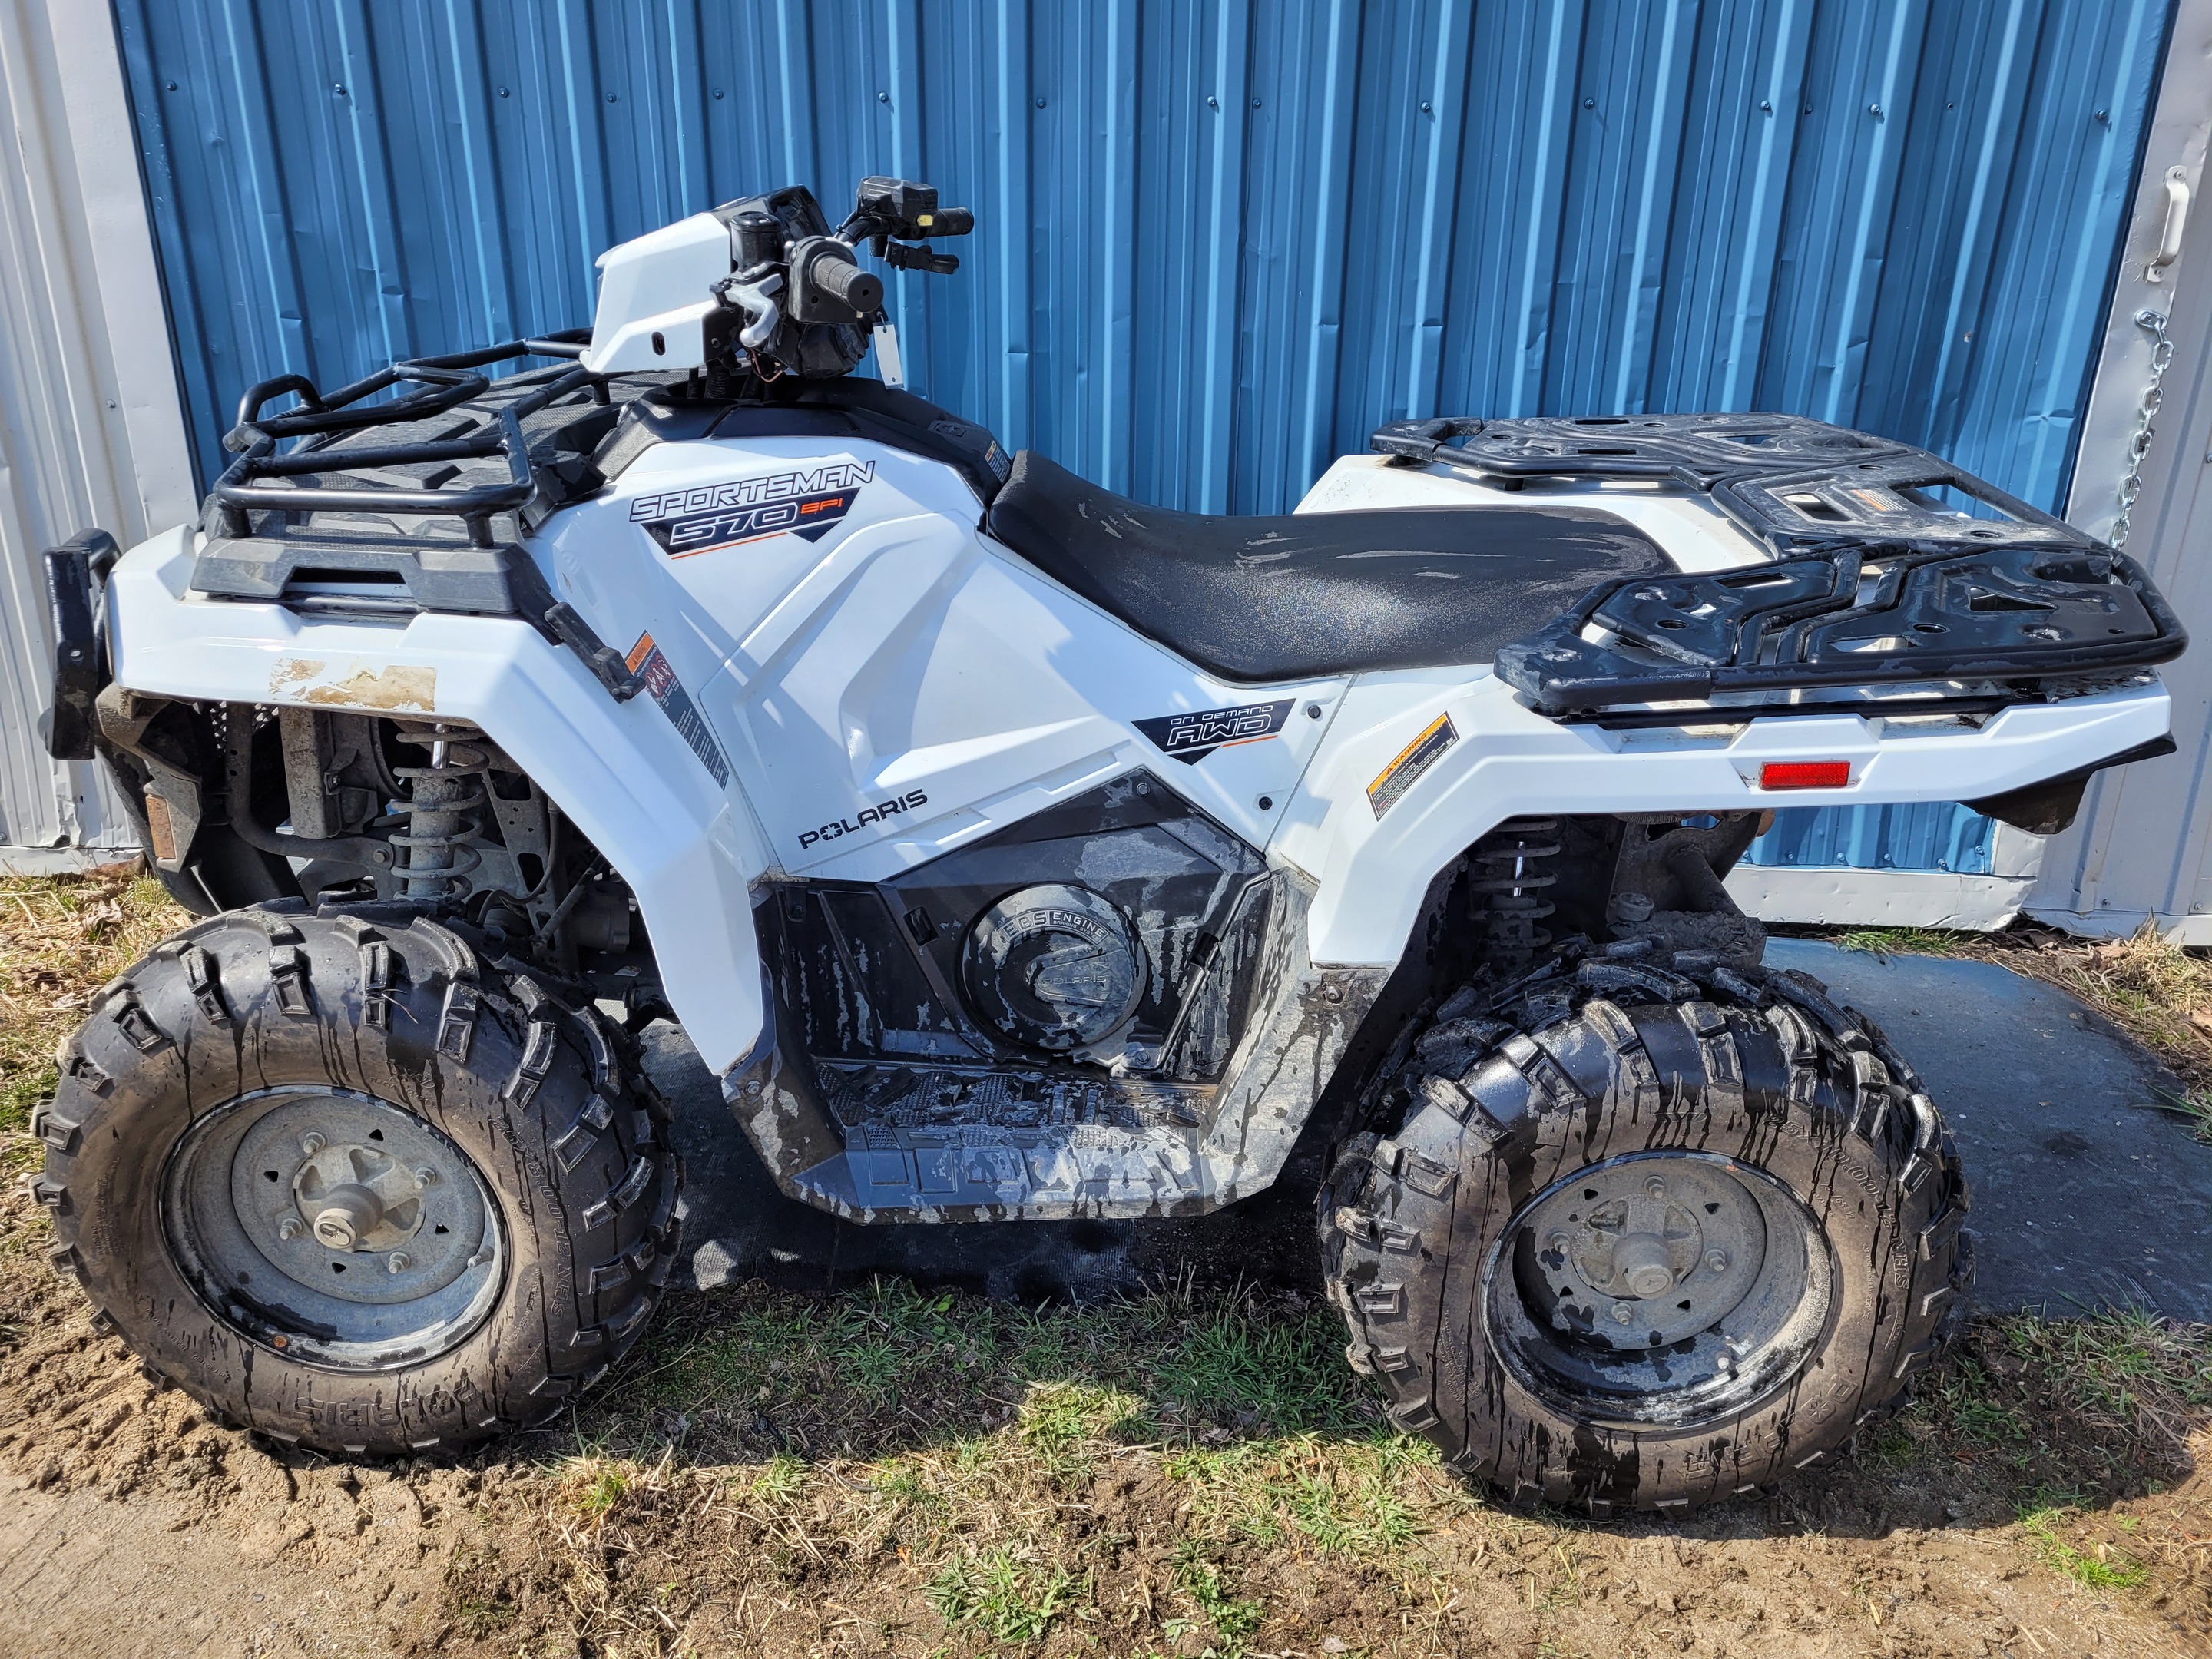 2023 Polaris Sportsman 570 EPS Utility Edition *1-Owner* Financing Available & Trade-ins Welcome!